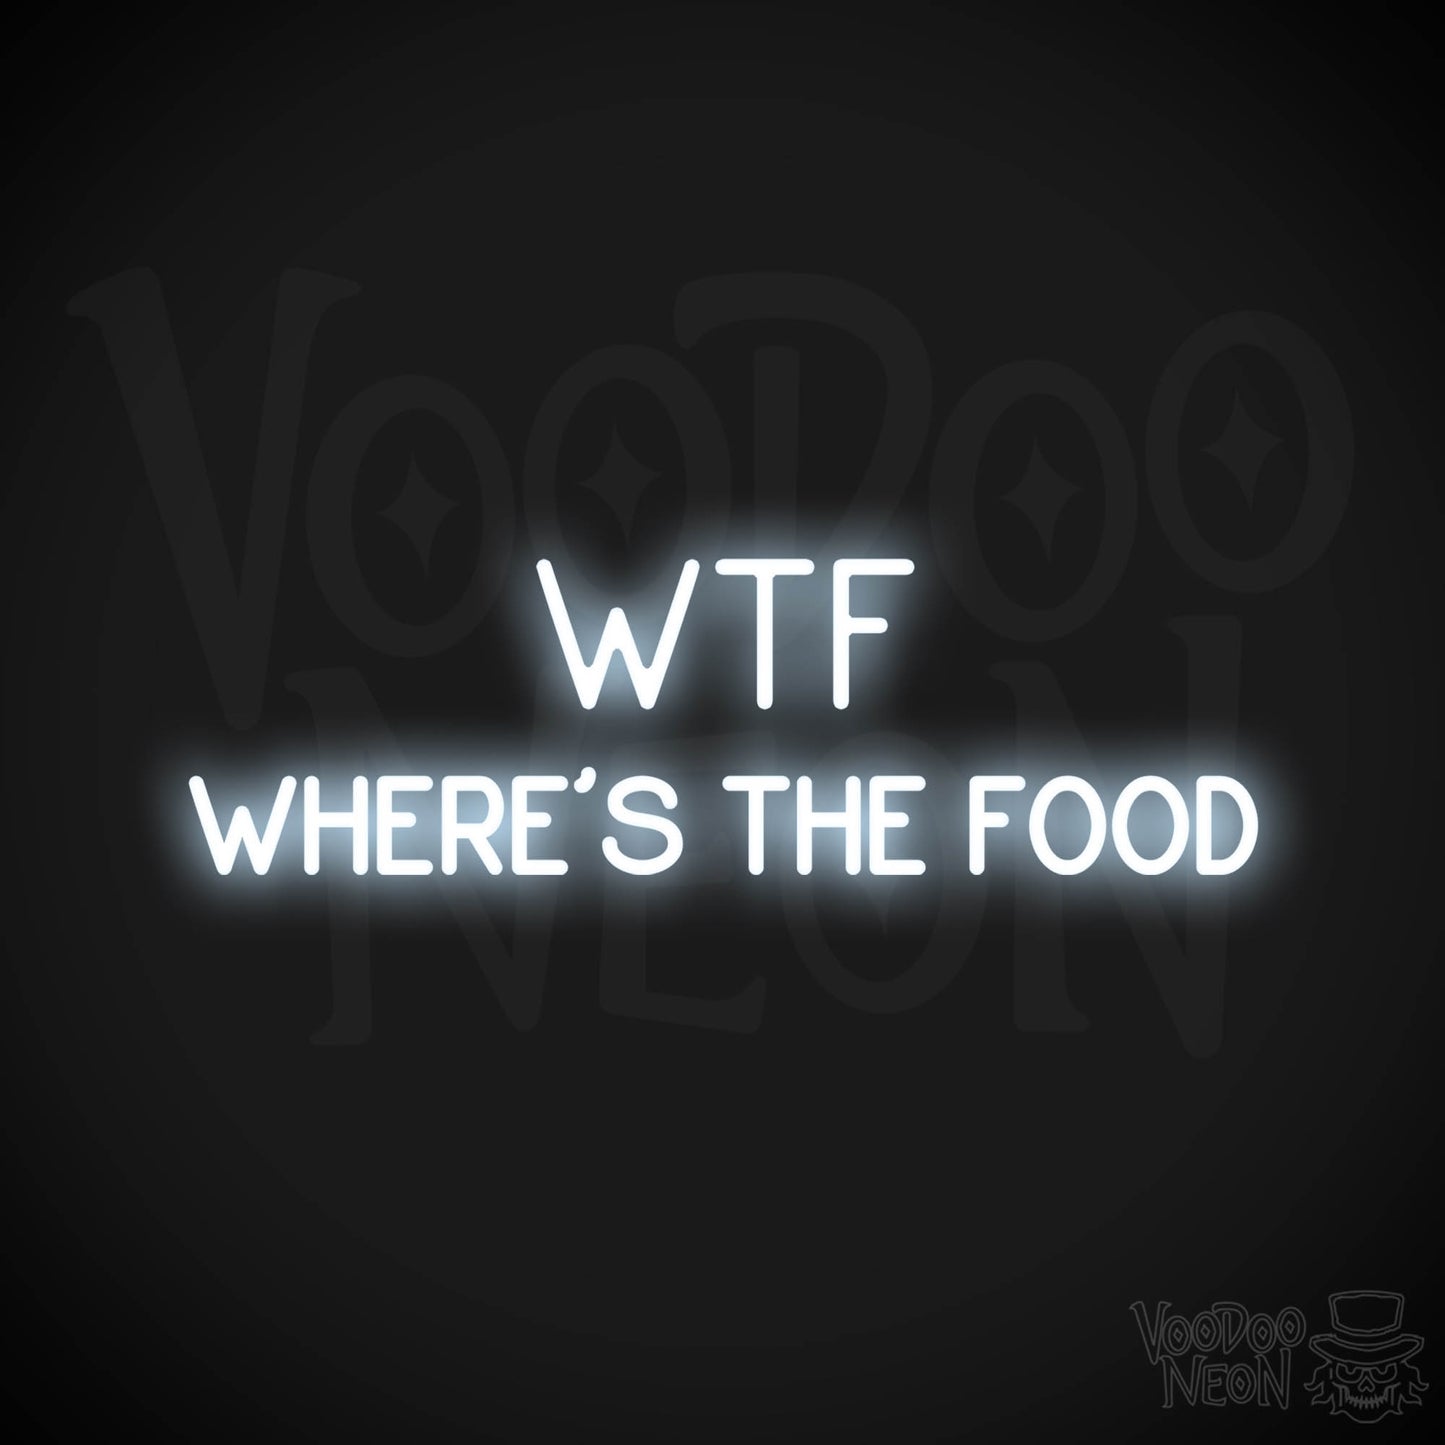 Wtf (Wheres The Food) LED Neon - Cool White